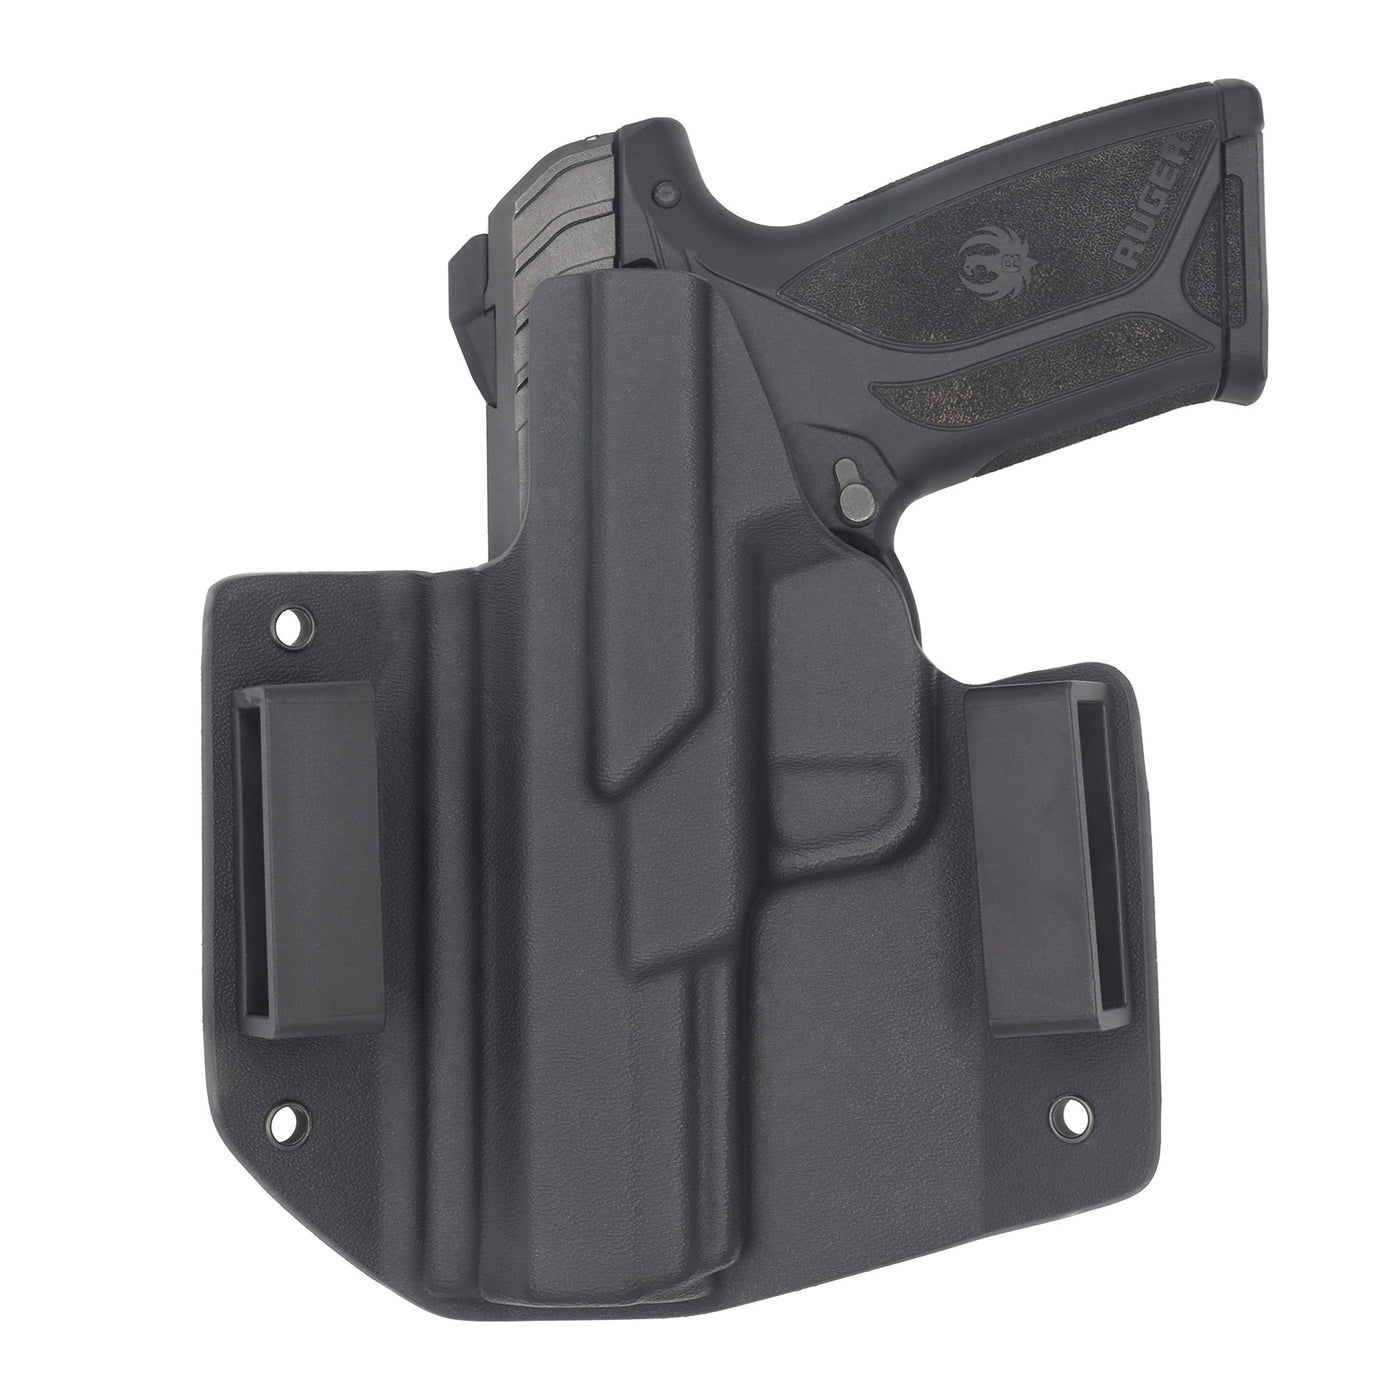 C&G Holsters OWB inside the waistband Holster for the Ruger Security 9 rear view